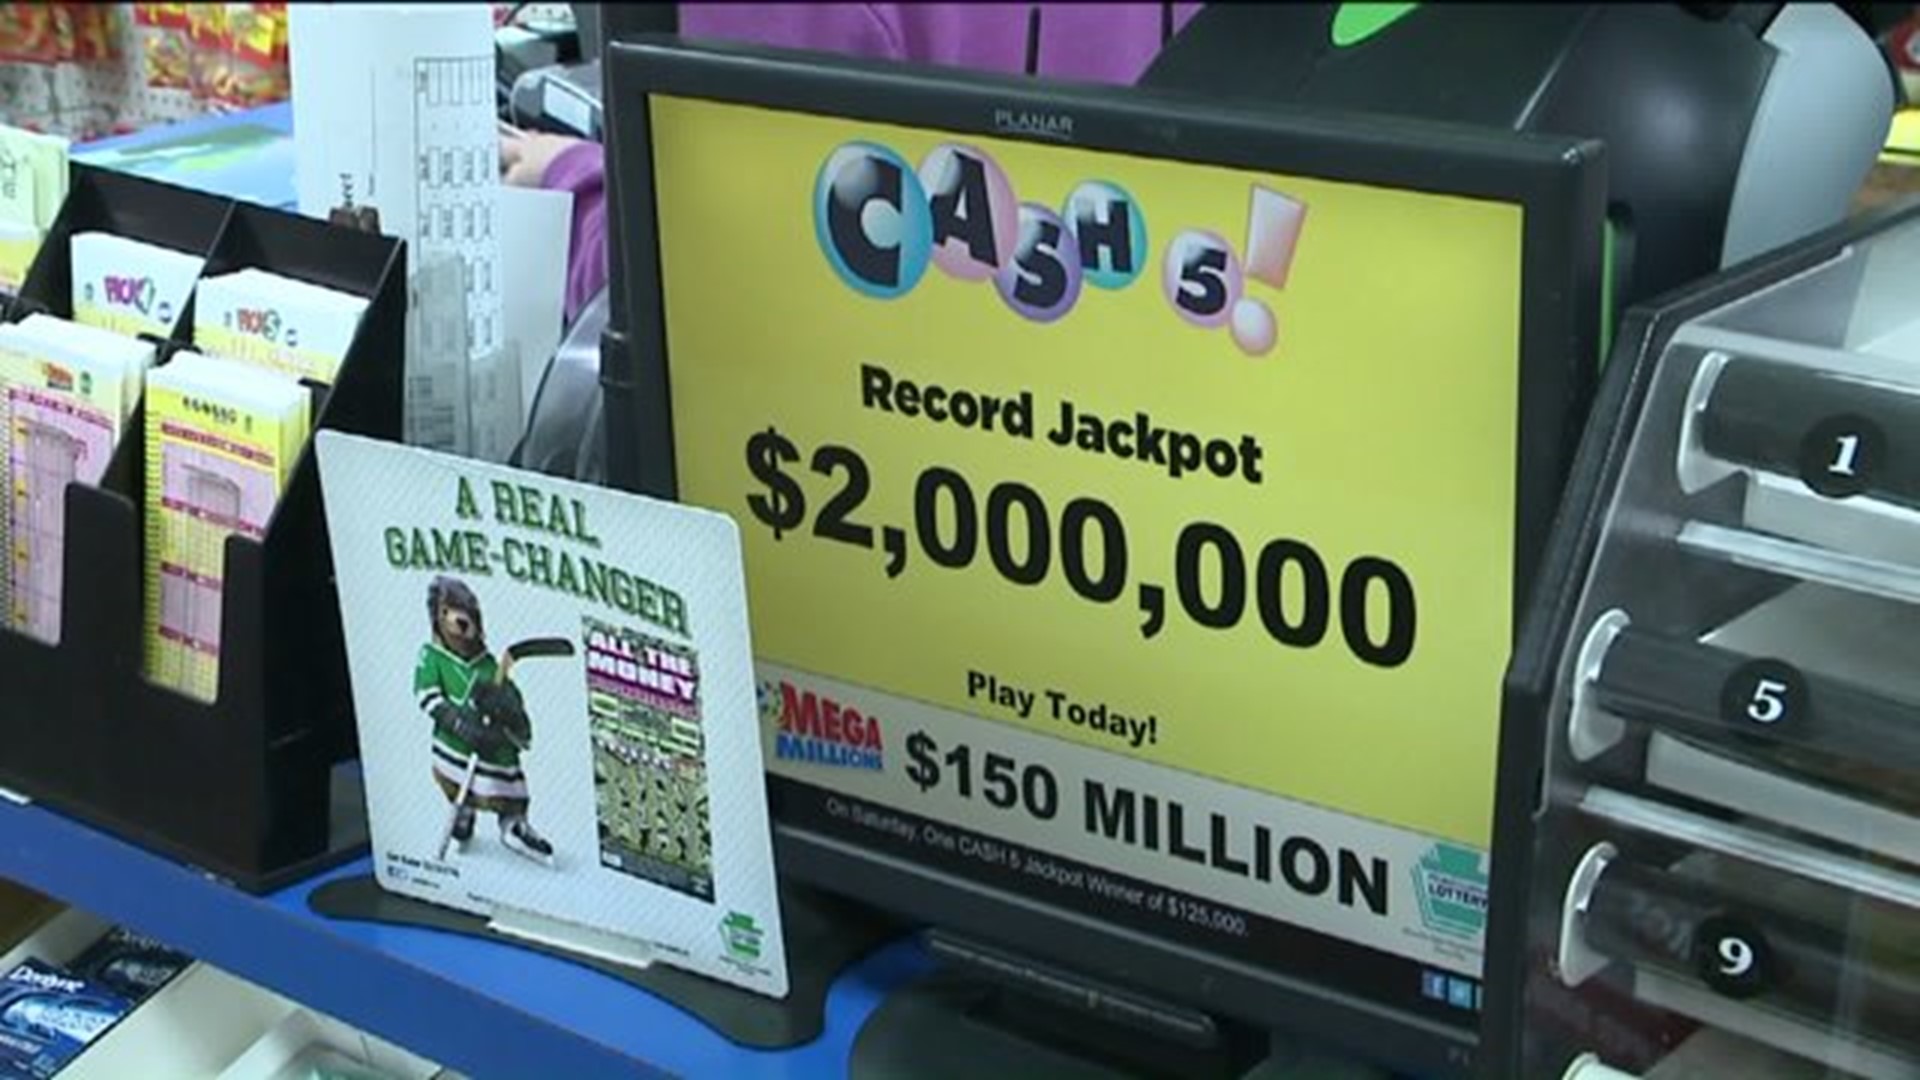 Cash 5 Record Prize Up for Grabs